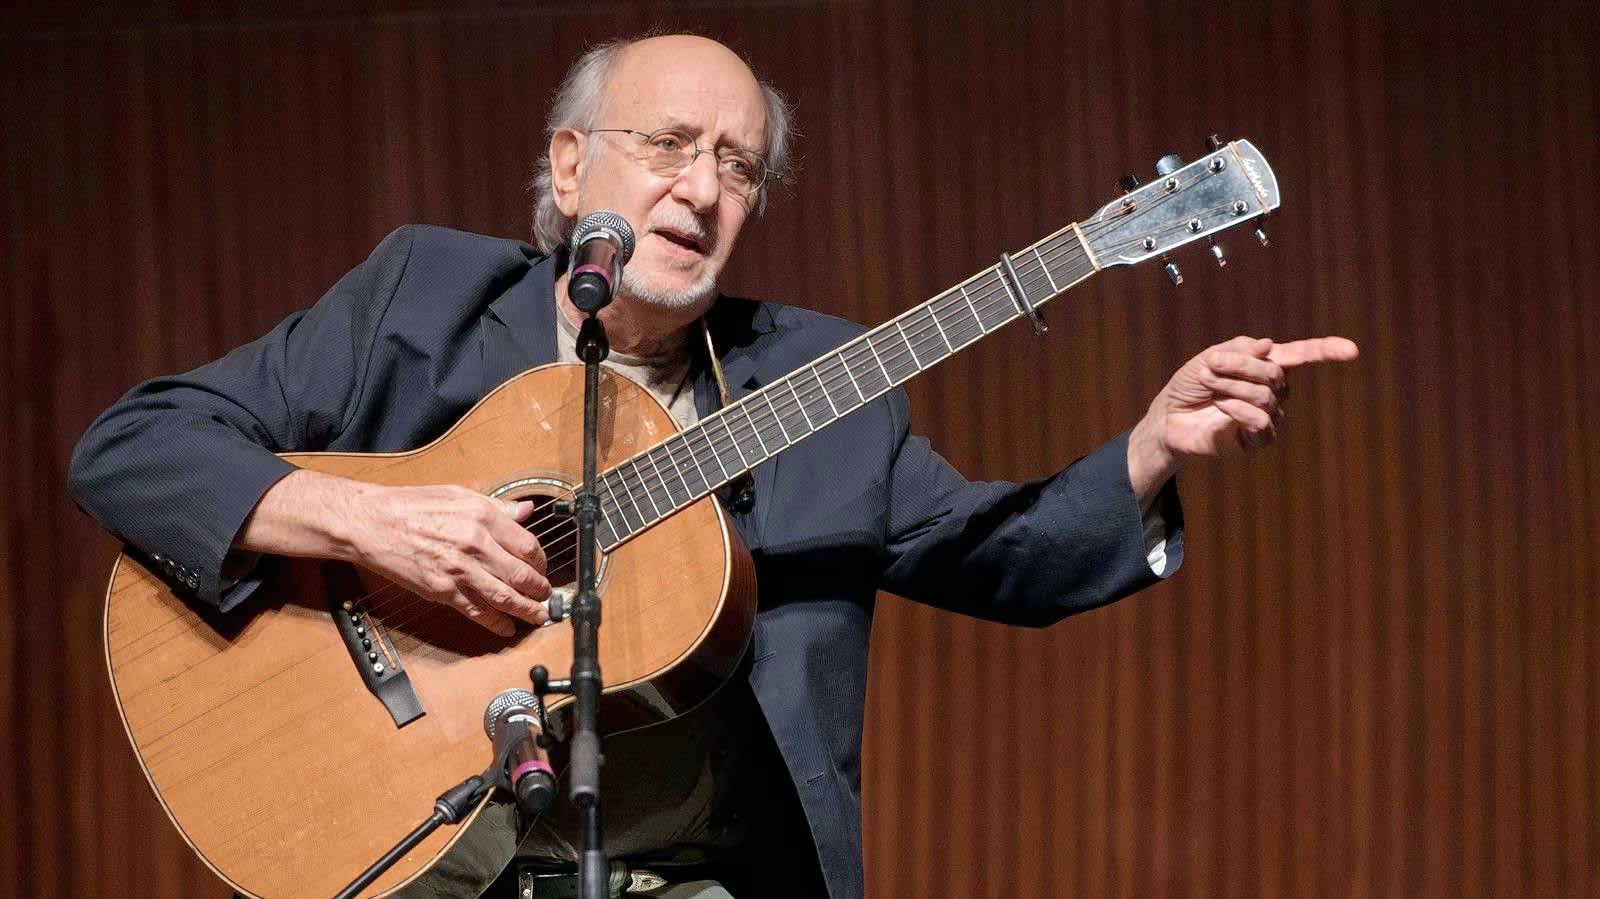 Peter Yarrow Saint Louis Tickets - 10/2/2020 at The Sheldon Concert Hall and Art Galleries ...